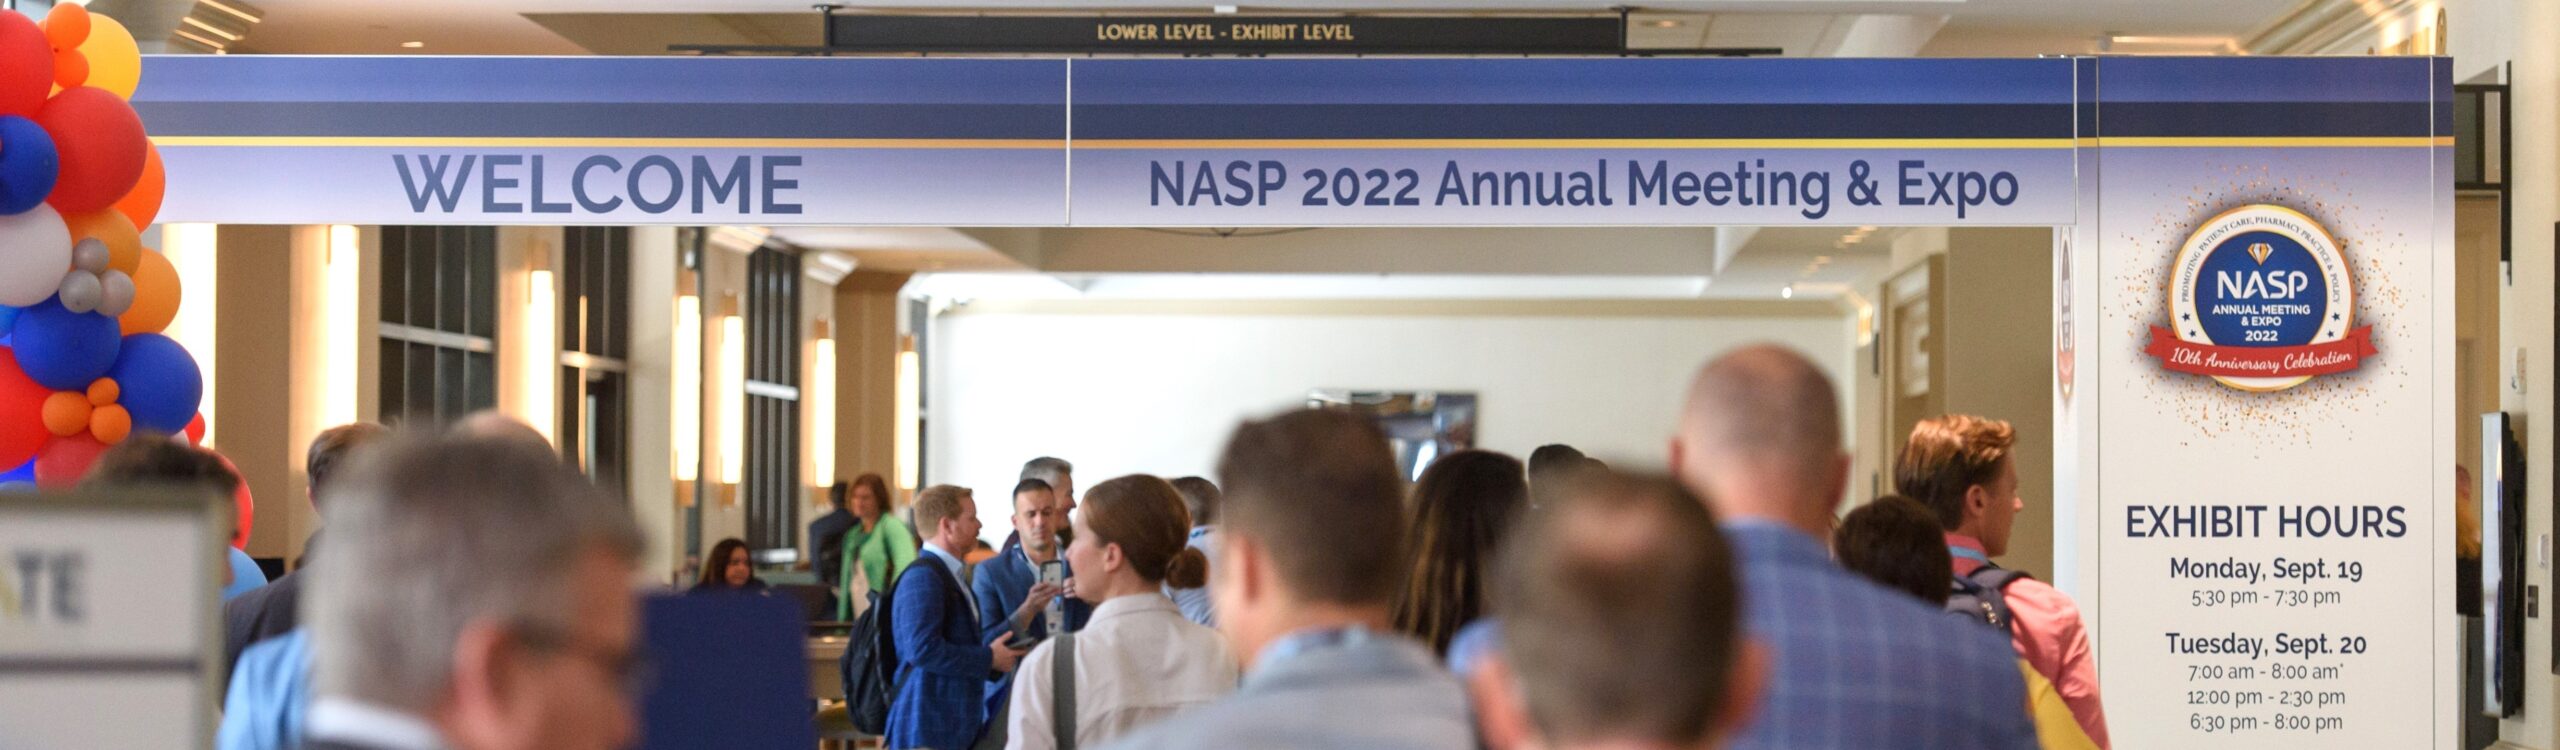 About NASP National Association of Specialty Pharmacy